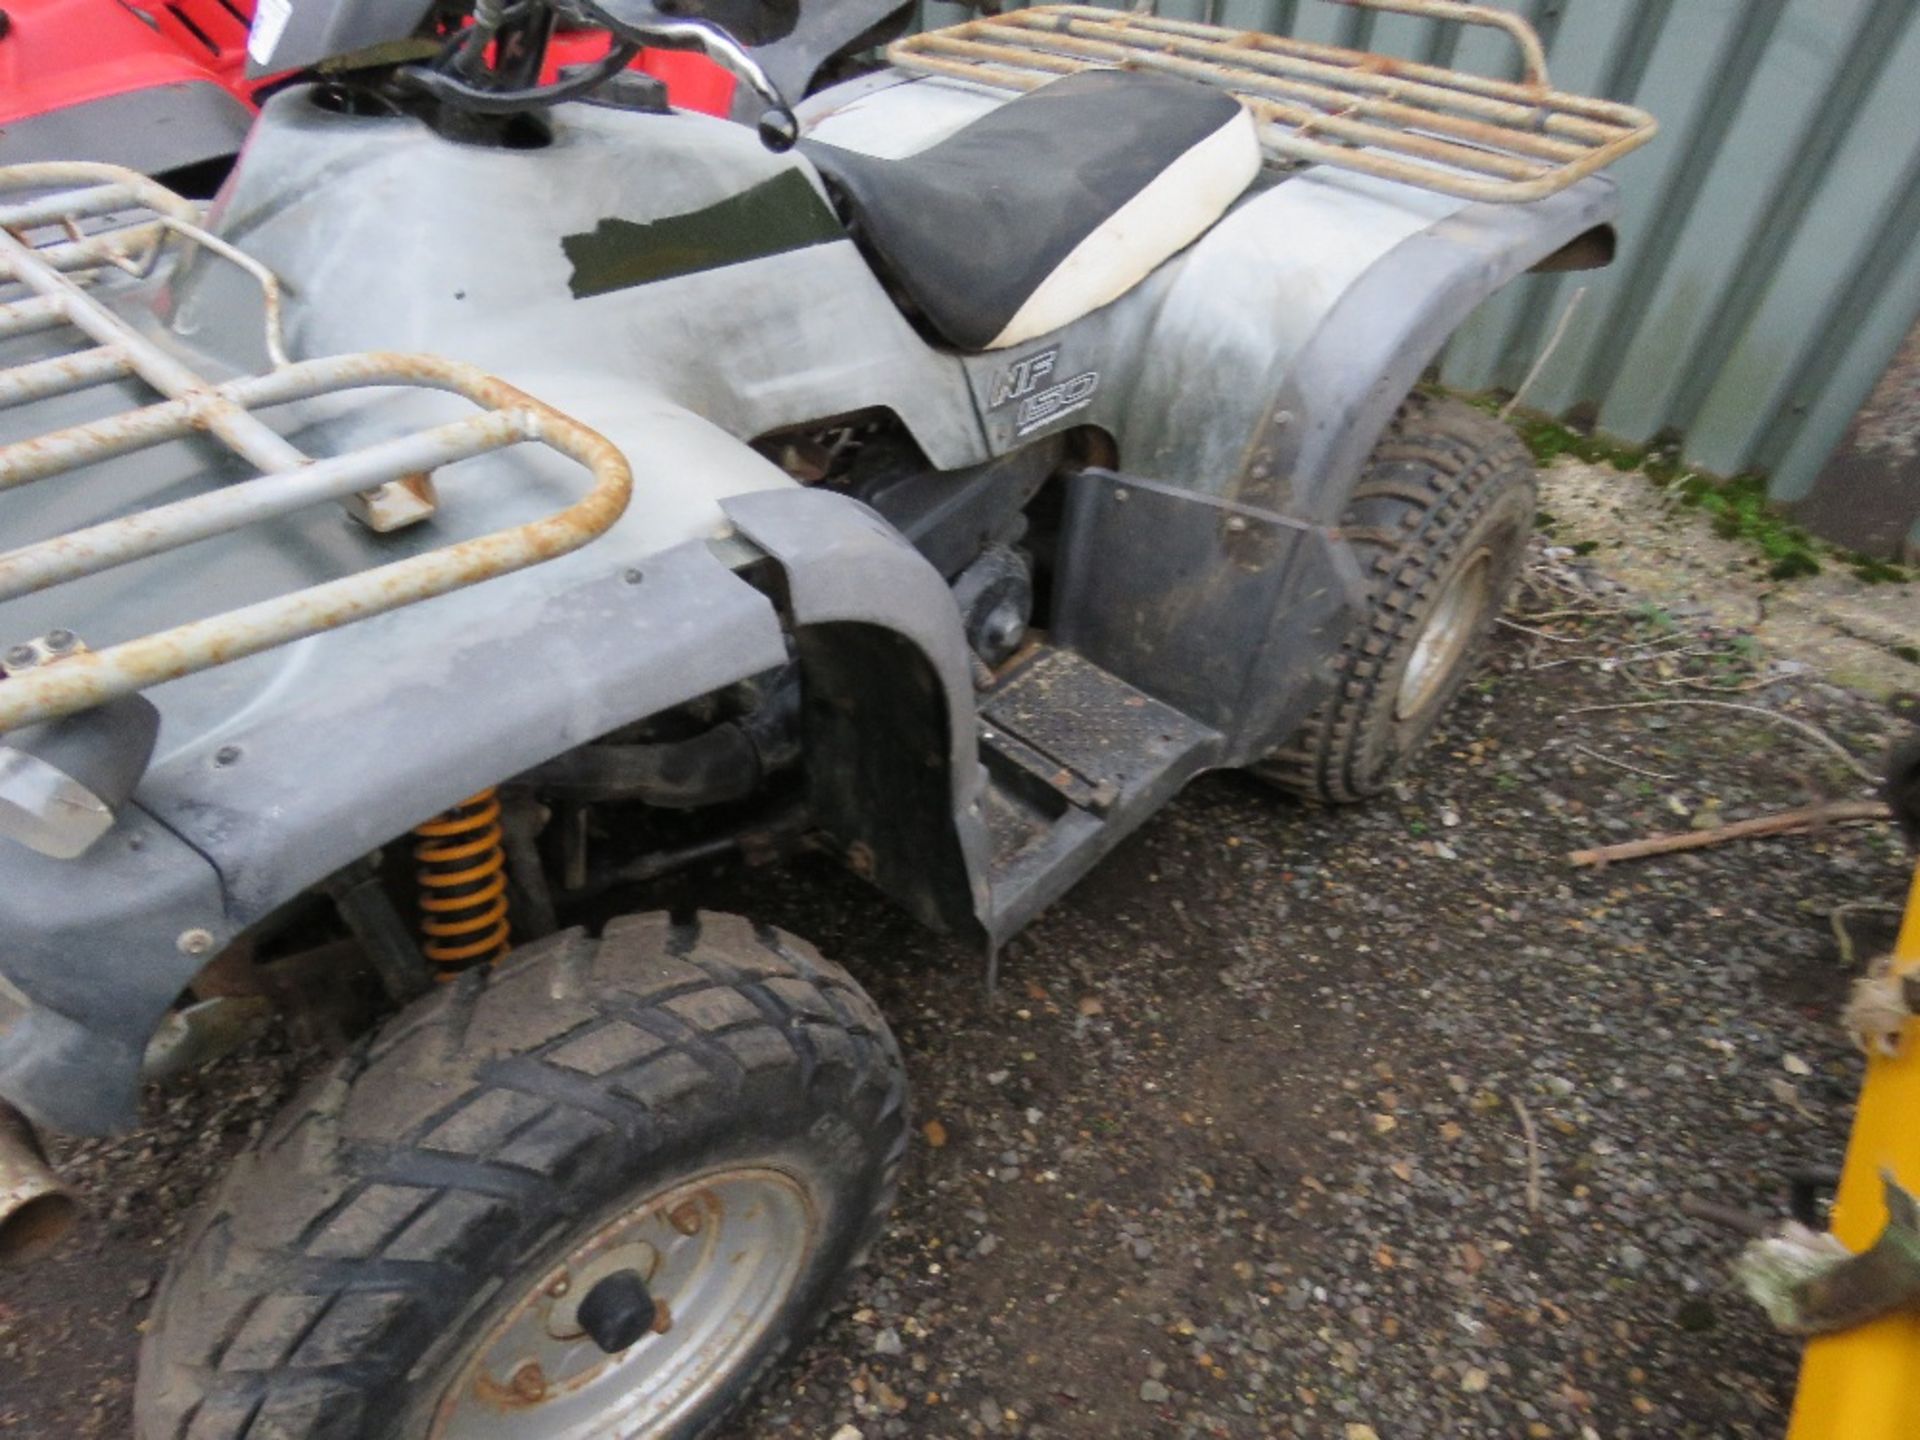 QUANTUM NF150 AUTO QUAD BIKE. WHEN TESTED WAS SEEN TO RUN AND DRIVE, STEER AND BRAKE BUT NEEDS ATTEN - Image 3 of 6